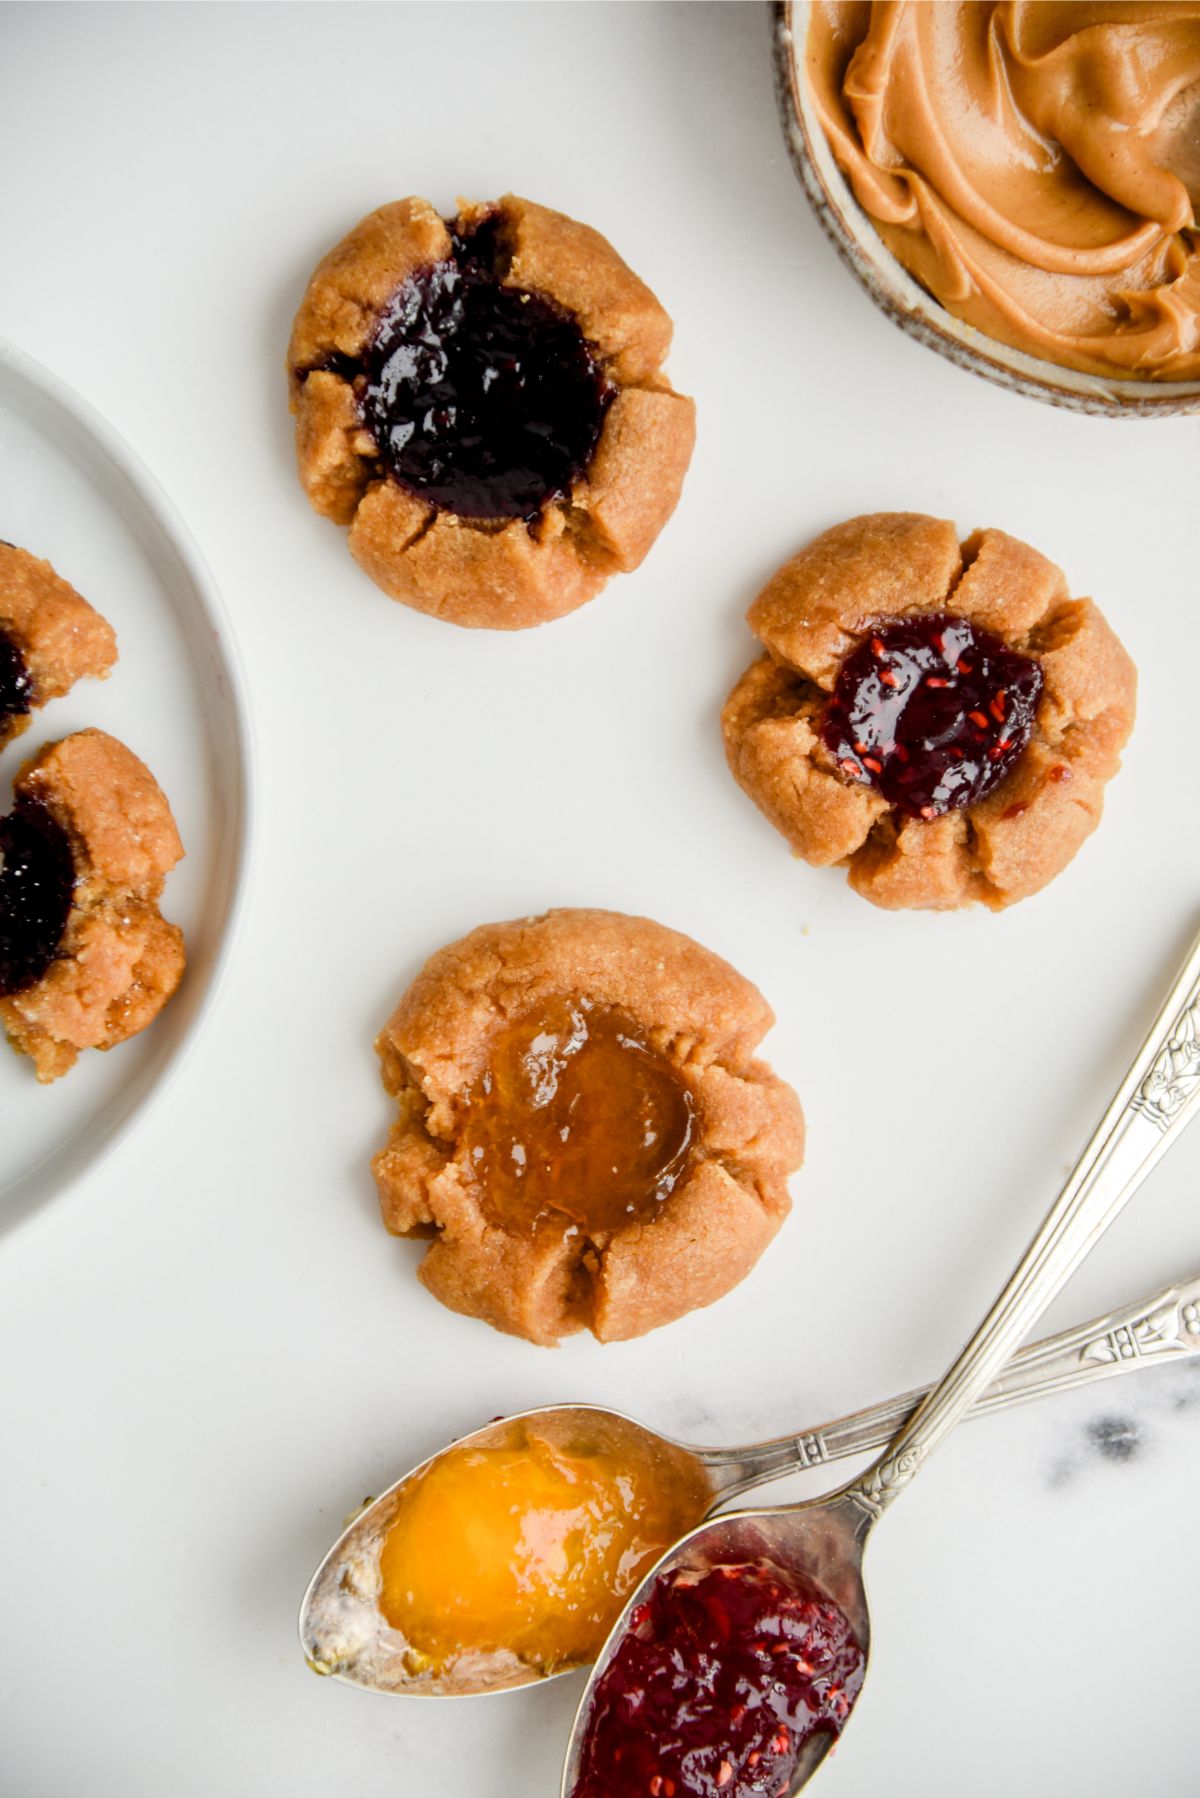 5 Ingredient Peanut Butter and Jam Thumbprint Cookies Recipe